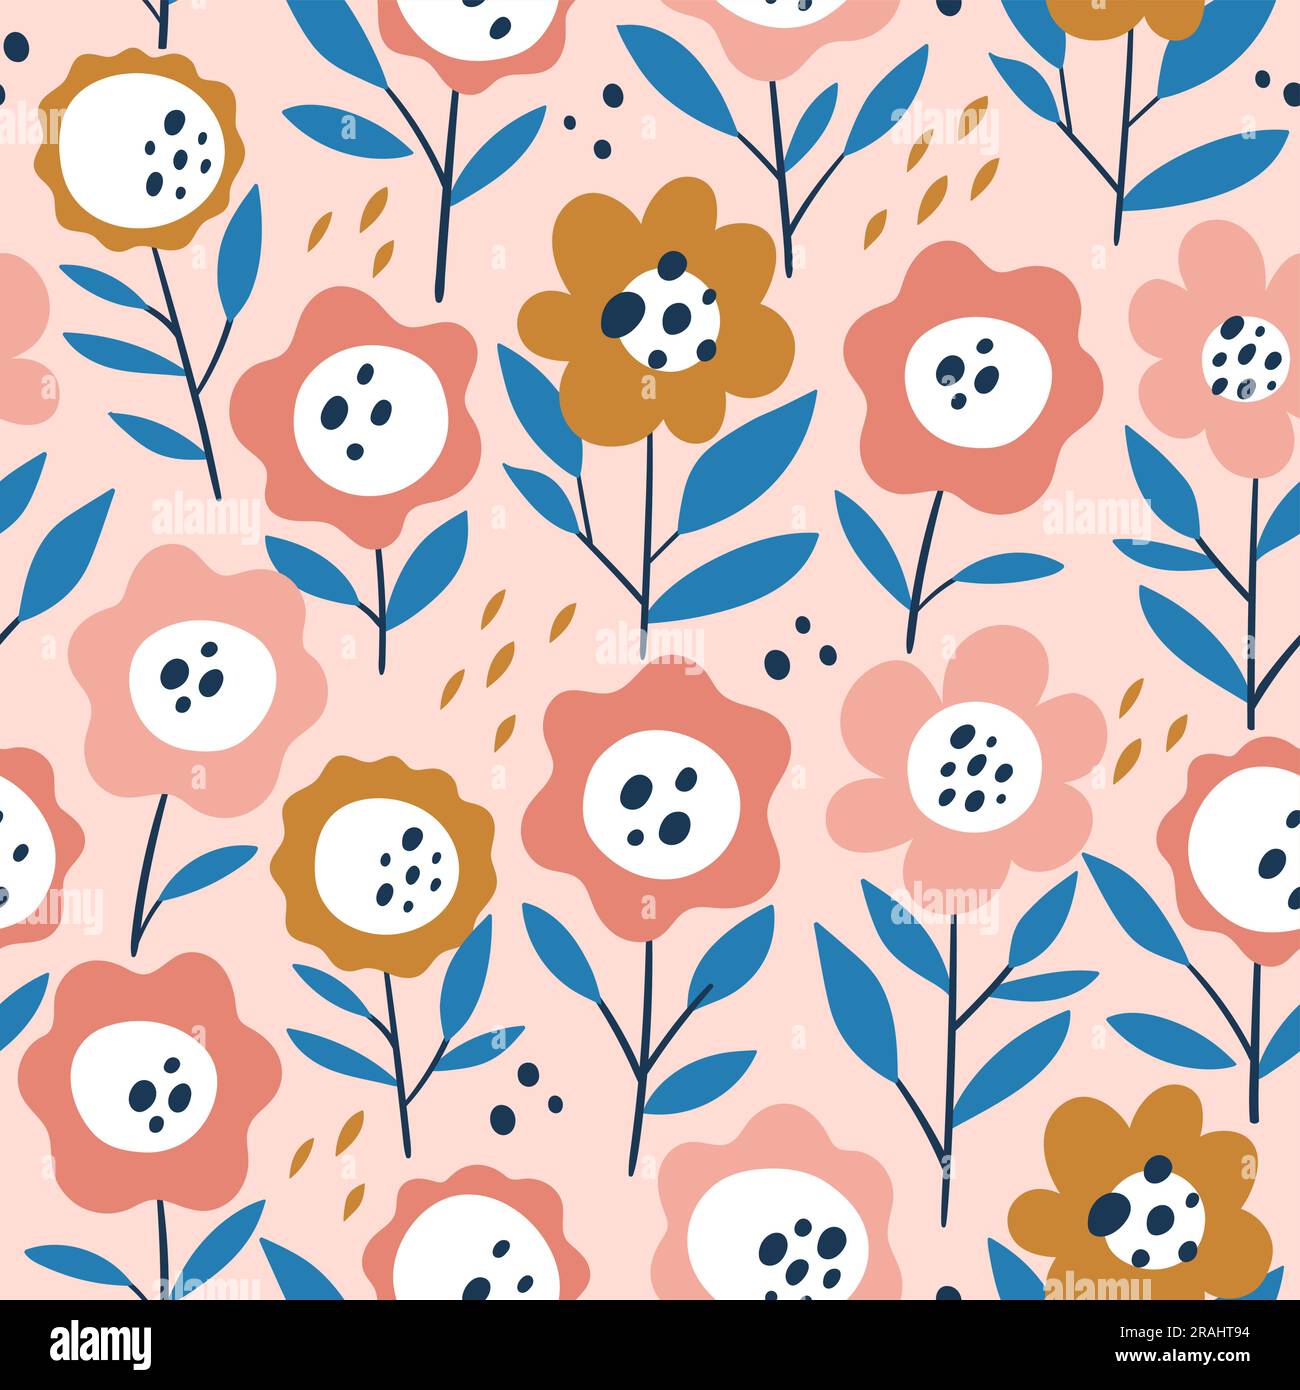 Abstract floral seamless pattern on light pink backgroun. Cute repeat pattern with daisy flowers. Square design. Vector illustration. Stock Vector